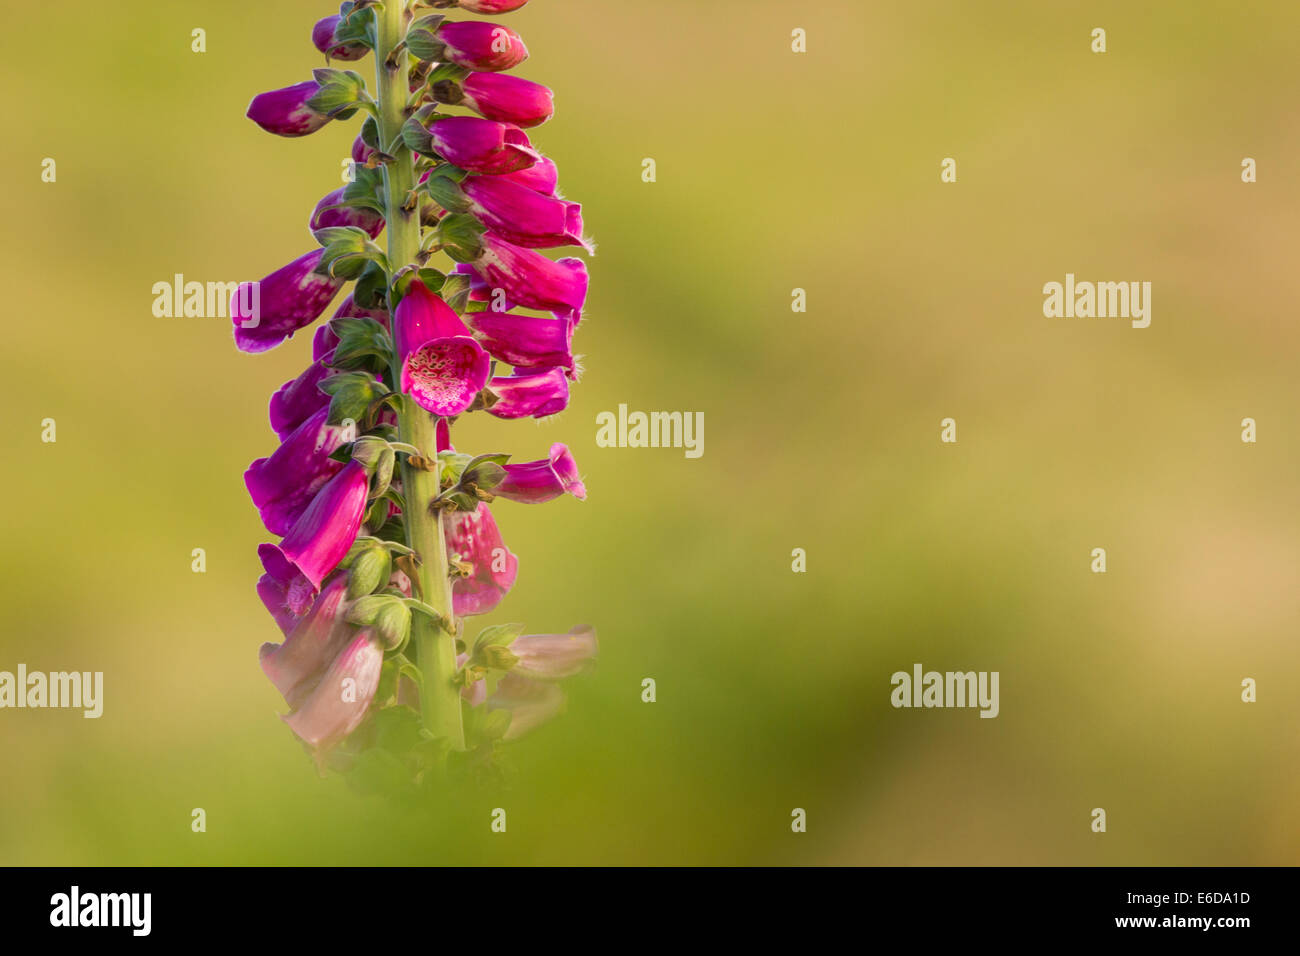 Common Fox glove Digitalis purpurea, the flowers of the common foxglove plant against a soft out of focus background, landscape Stock Photo